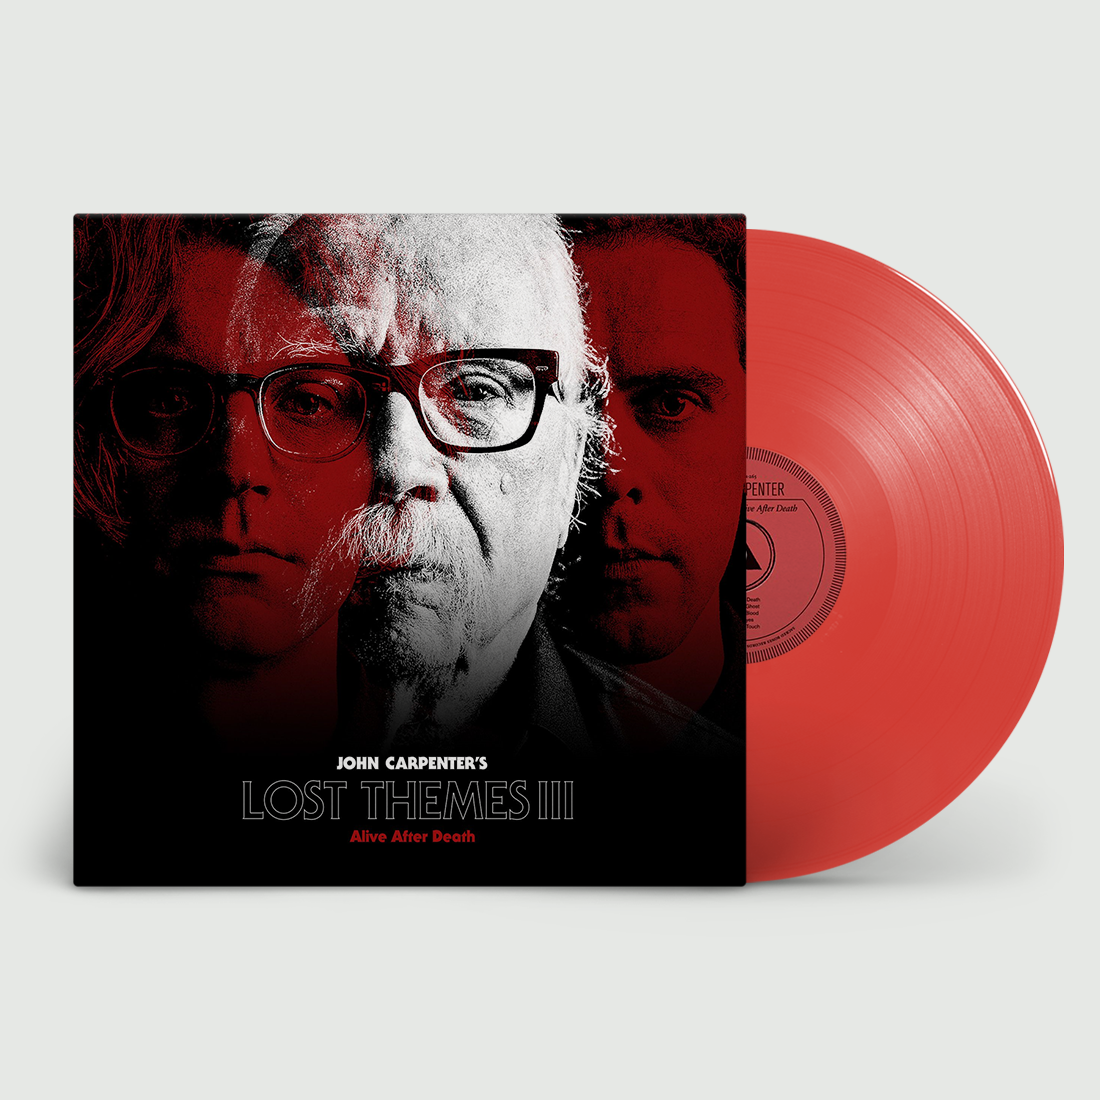 Lost Themes III: Limited Edition Red Vinyl LP